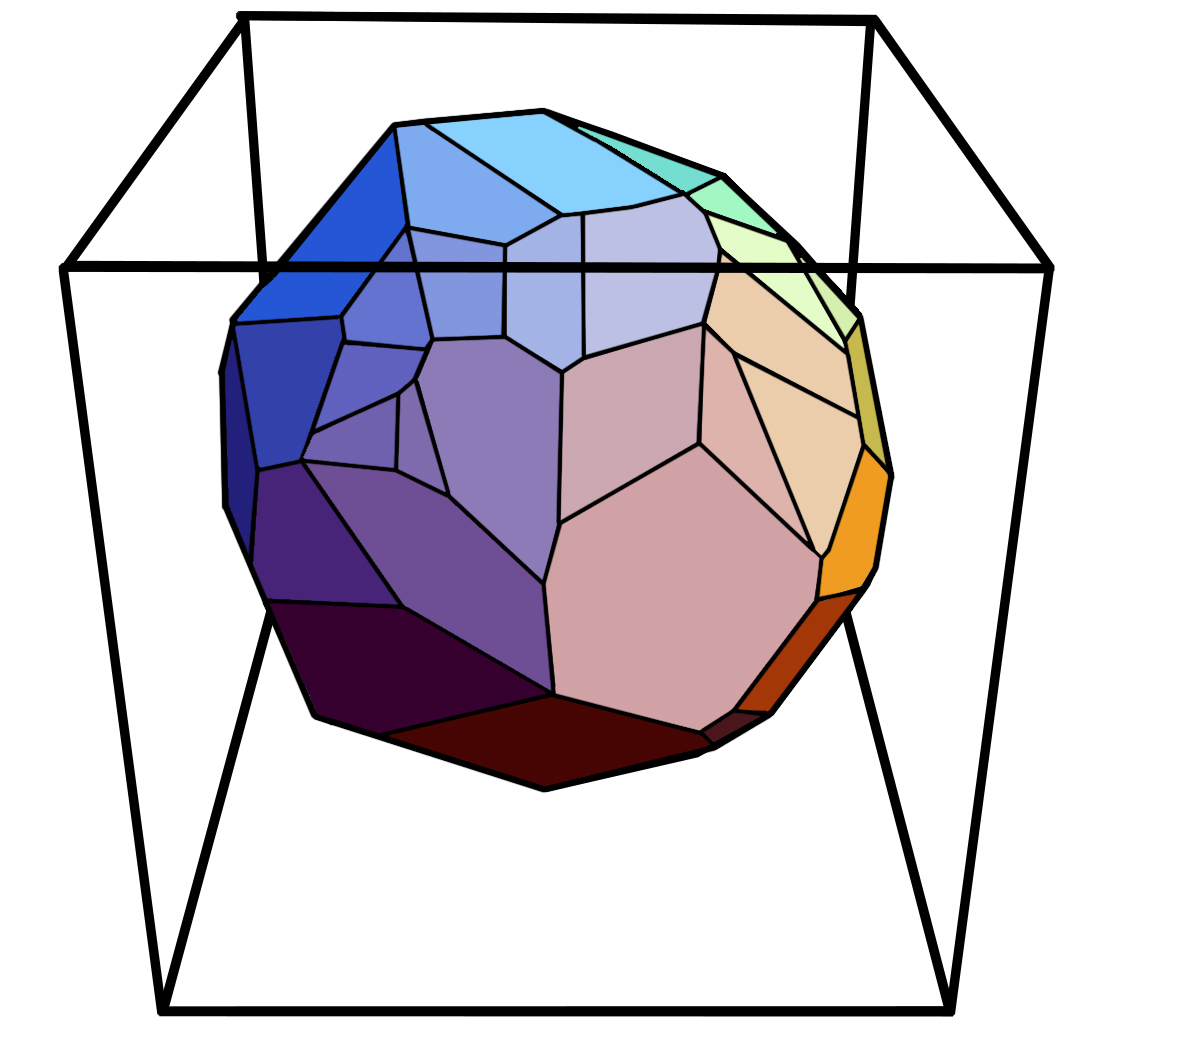 Polyhedron in a 3D cube